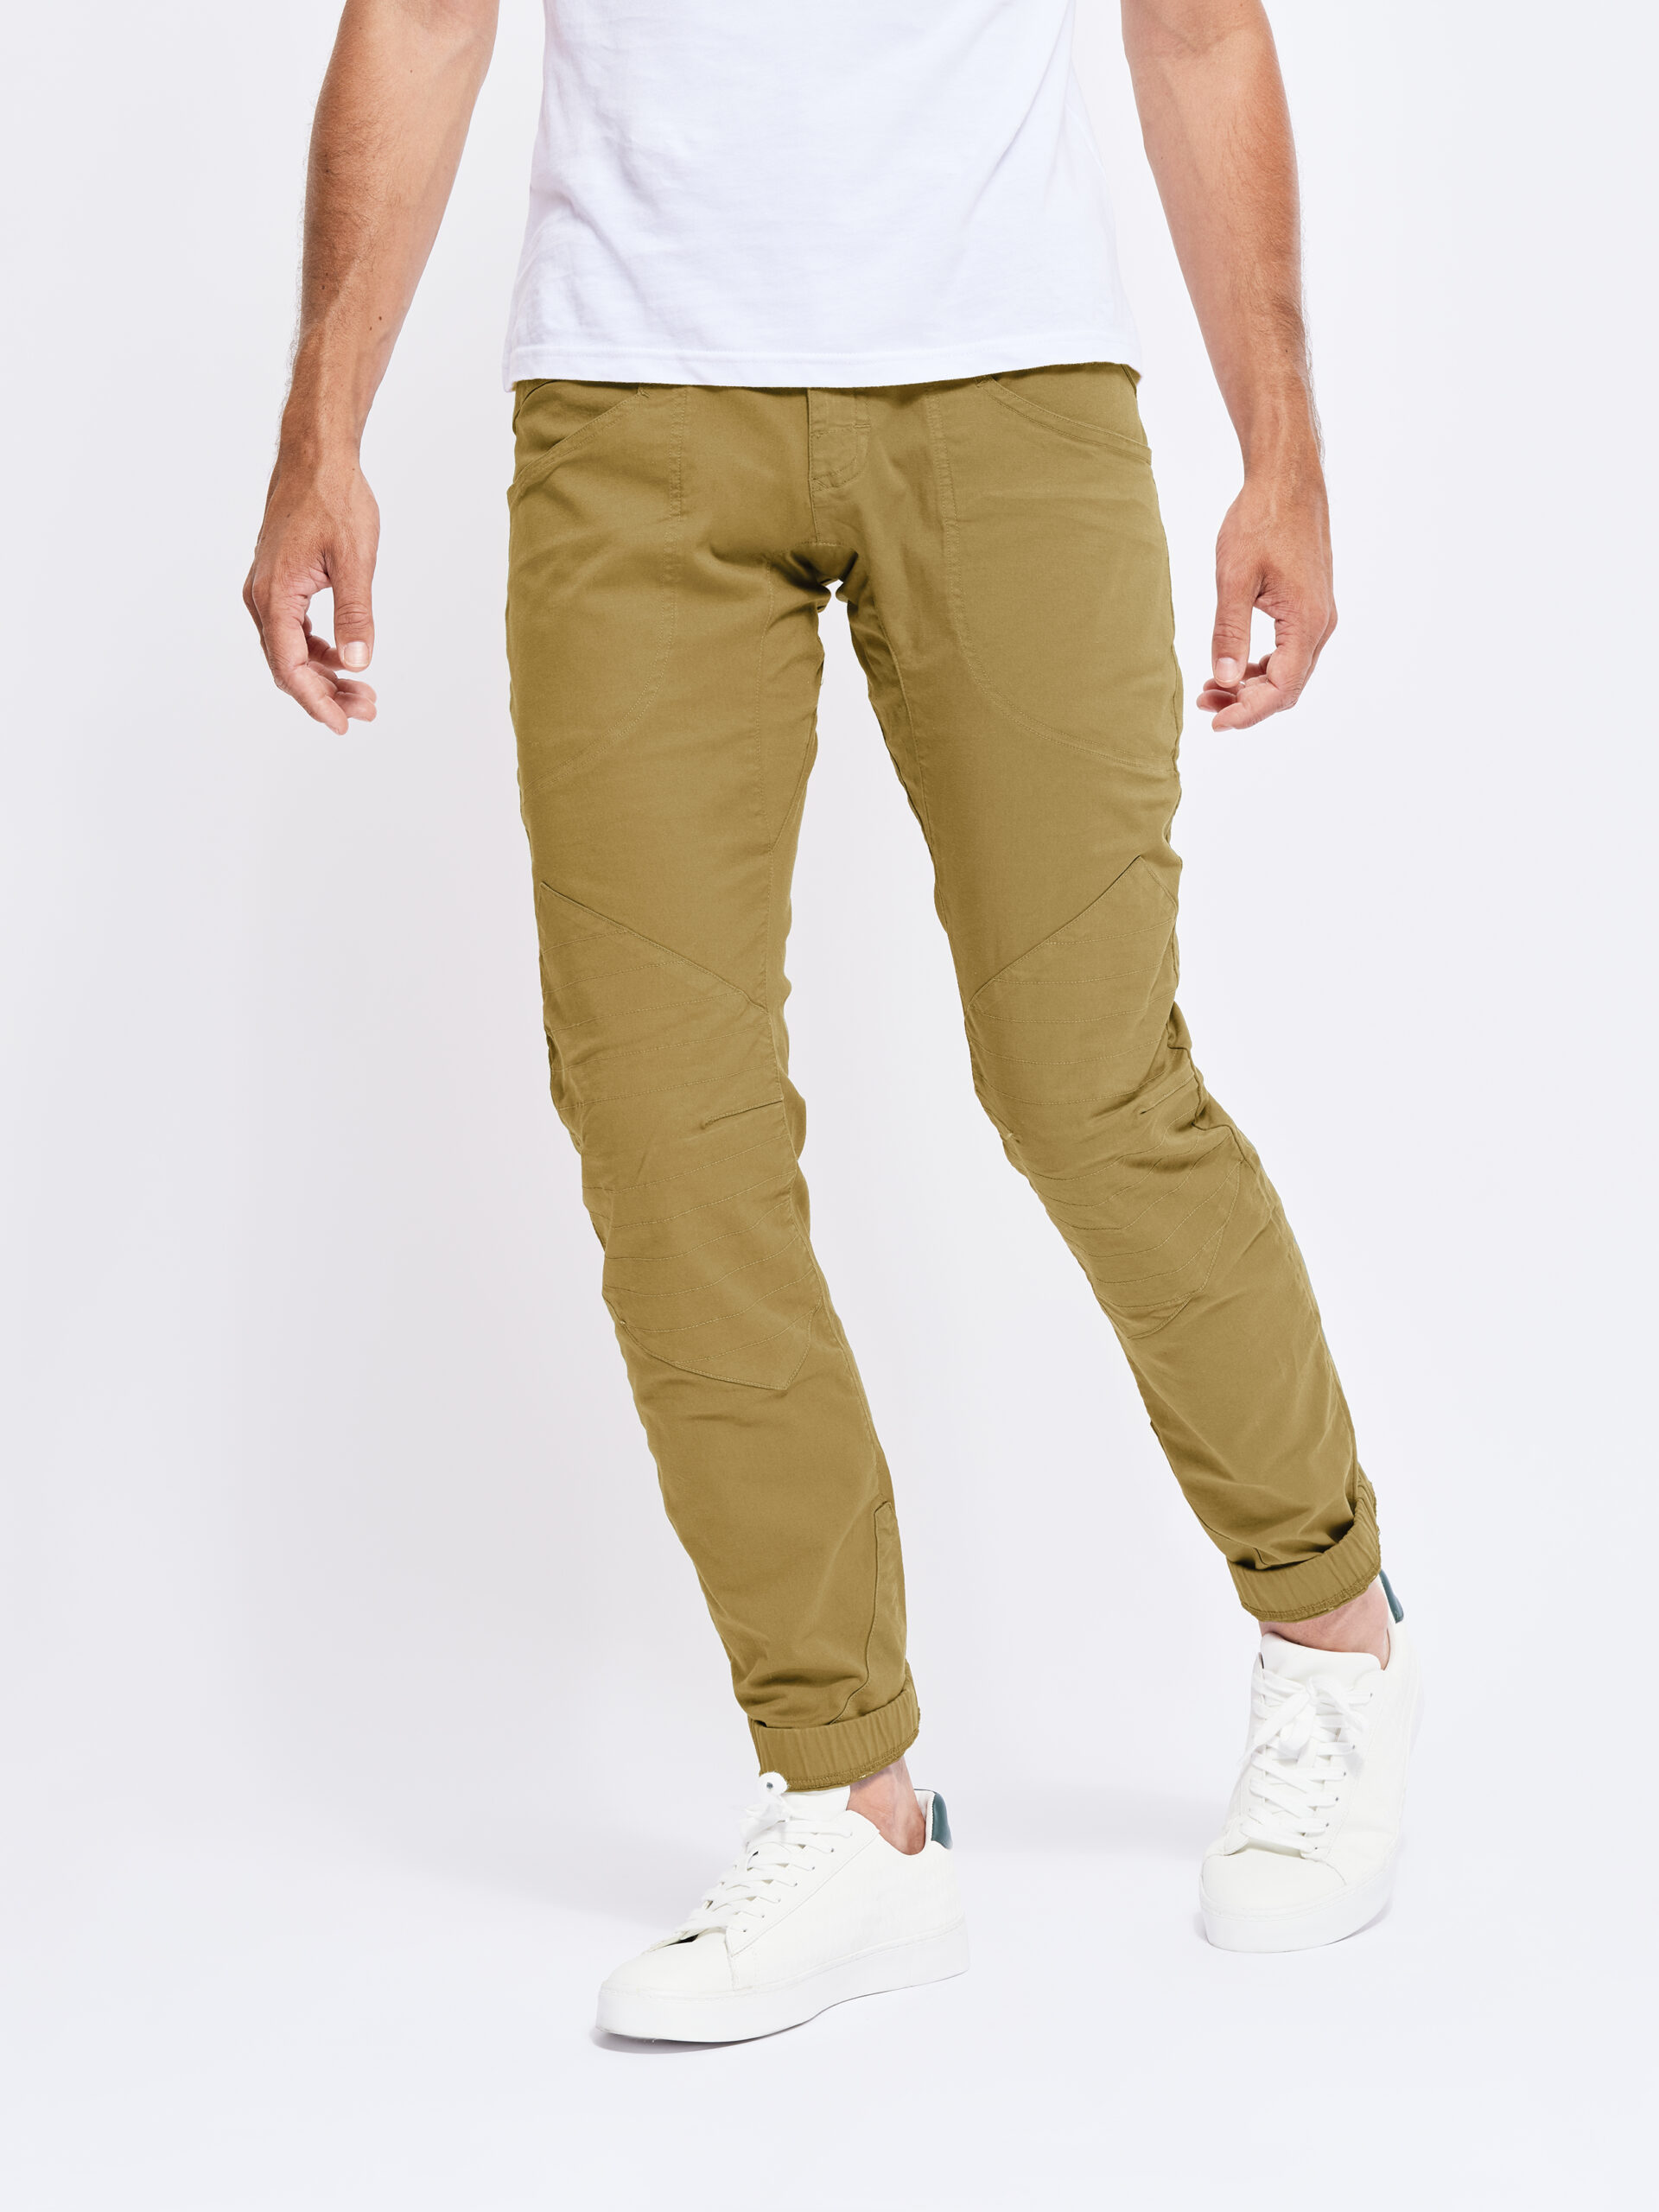 Looking For Wild Fitz Roy Pant - Climbing trousers - Men's